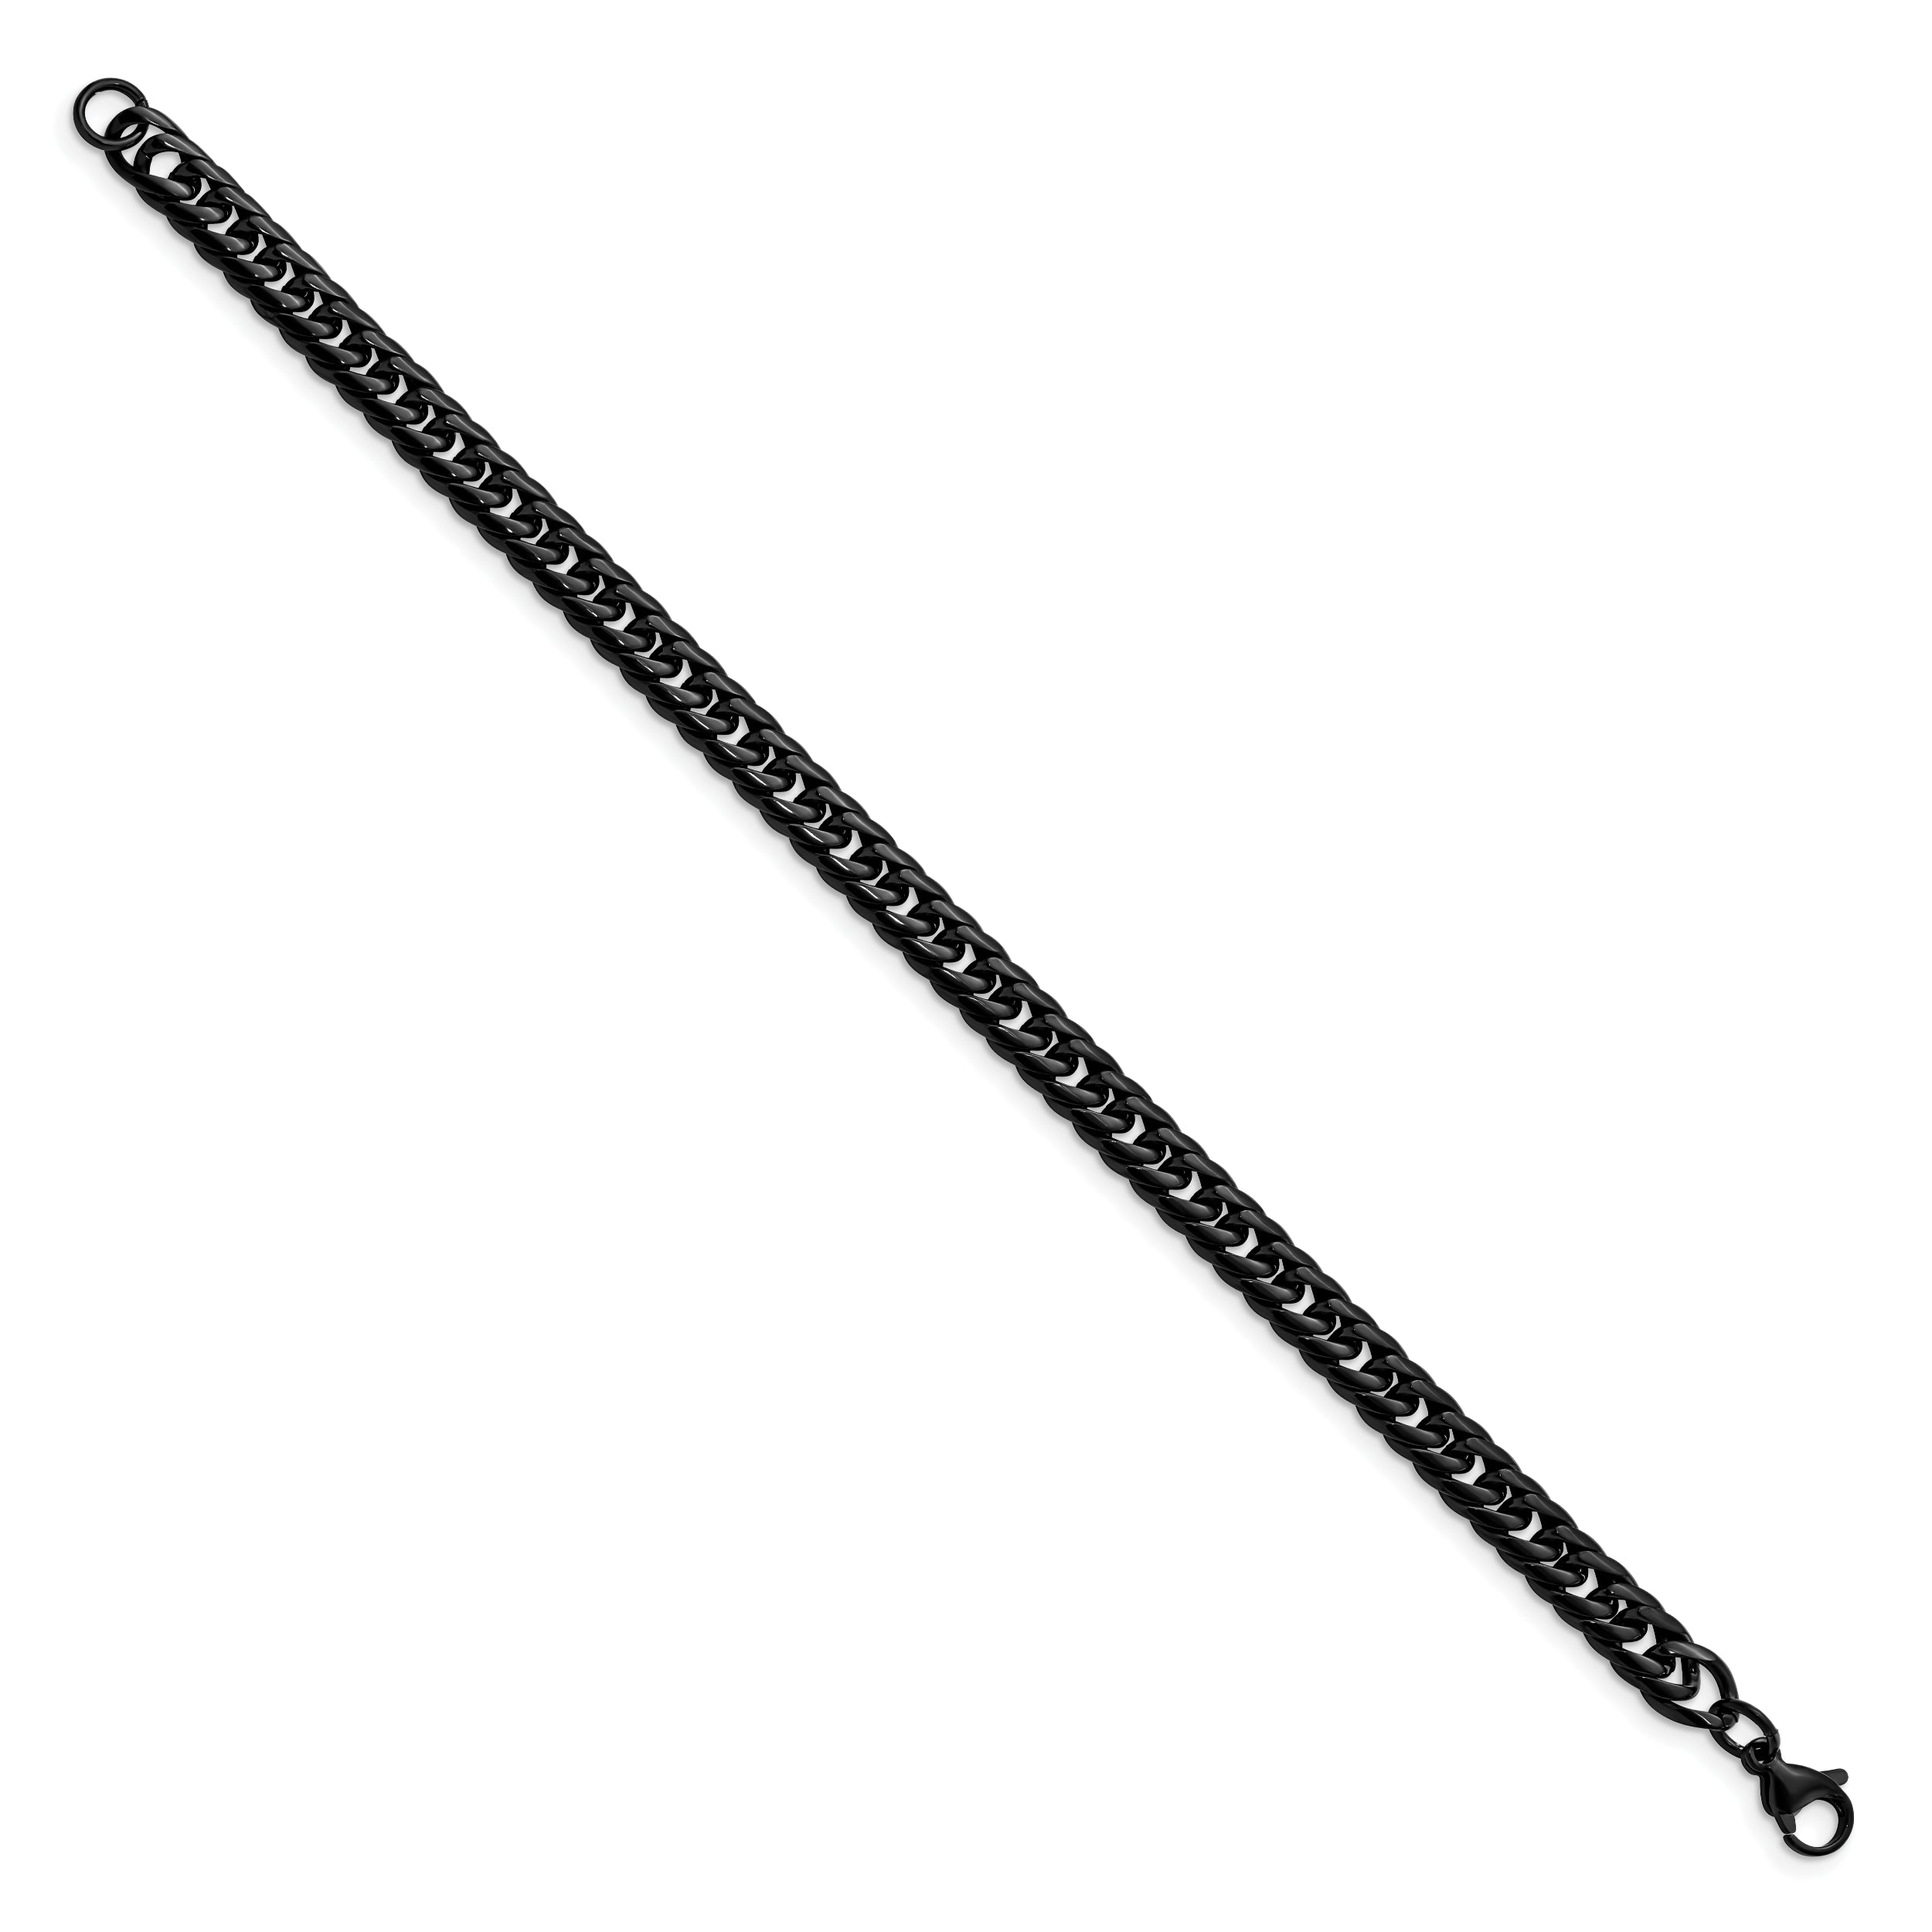 Chisel Stainless Steel Polished Black IP-plated 9 inch Curb Chain Bracelet